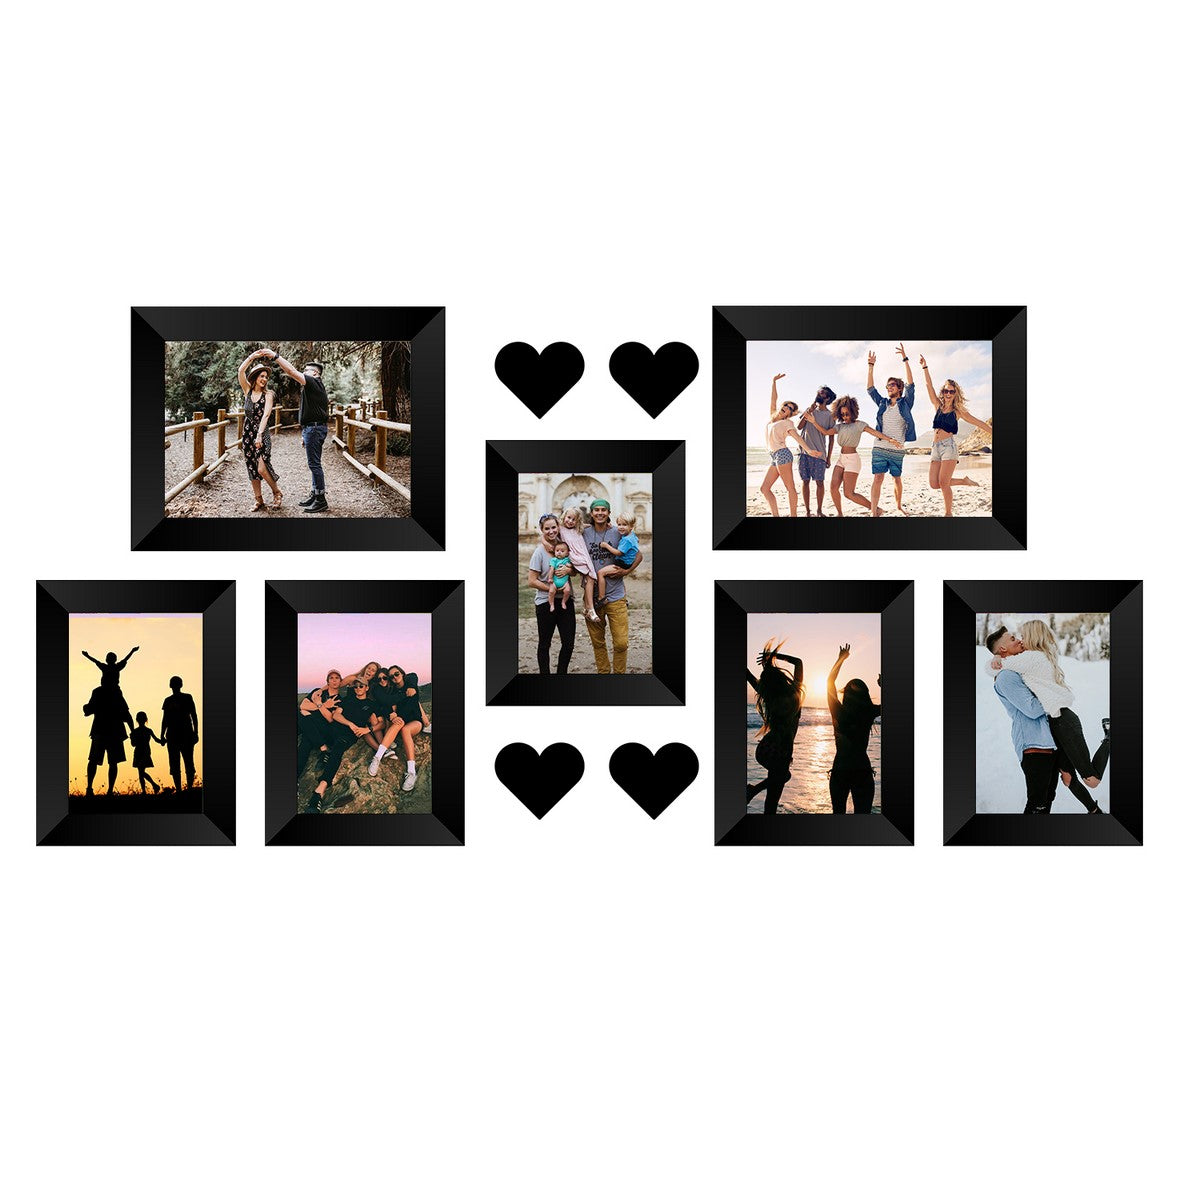 Memory Wall Collage Photo Frame - Set of 7 Photo Frames for 5 Photos of 4"x6", 2 Photos of 5"x7", 4 Pieces of HEARTS